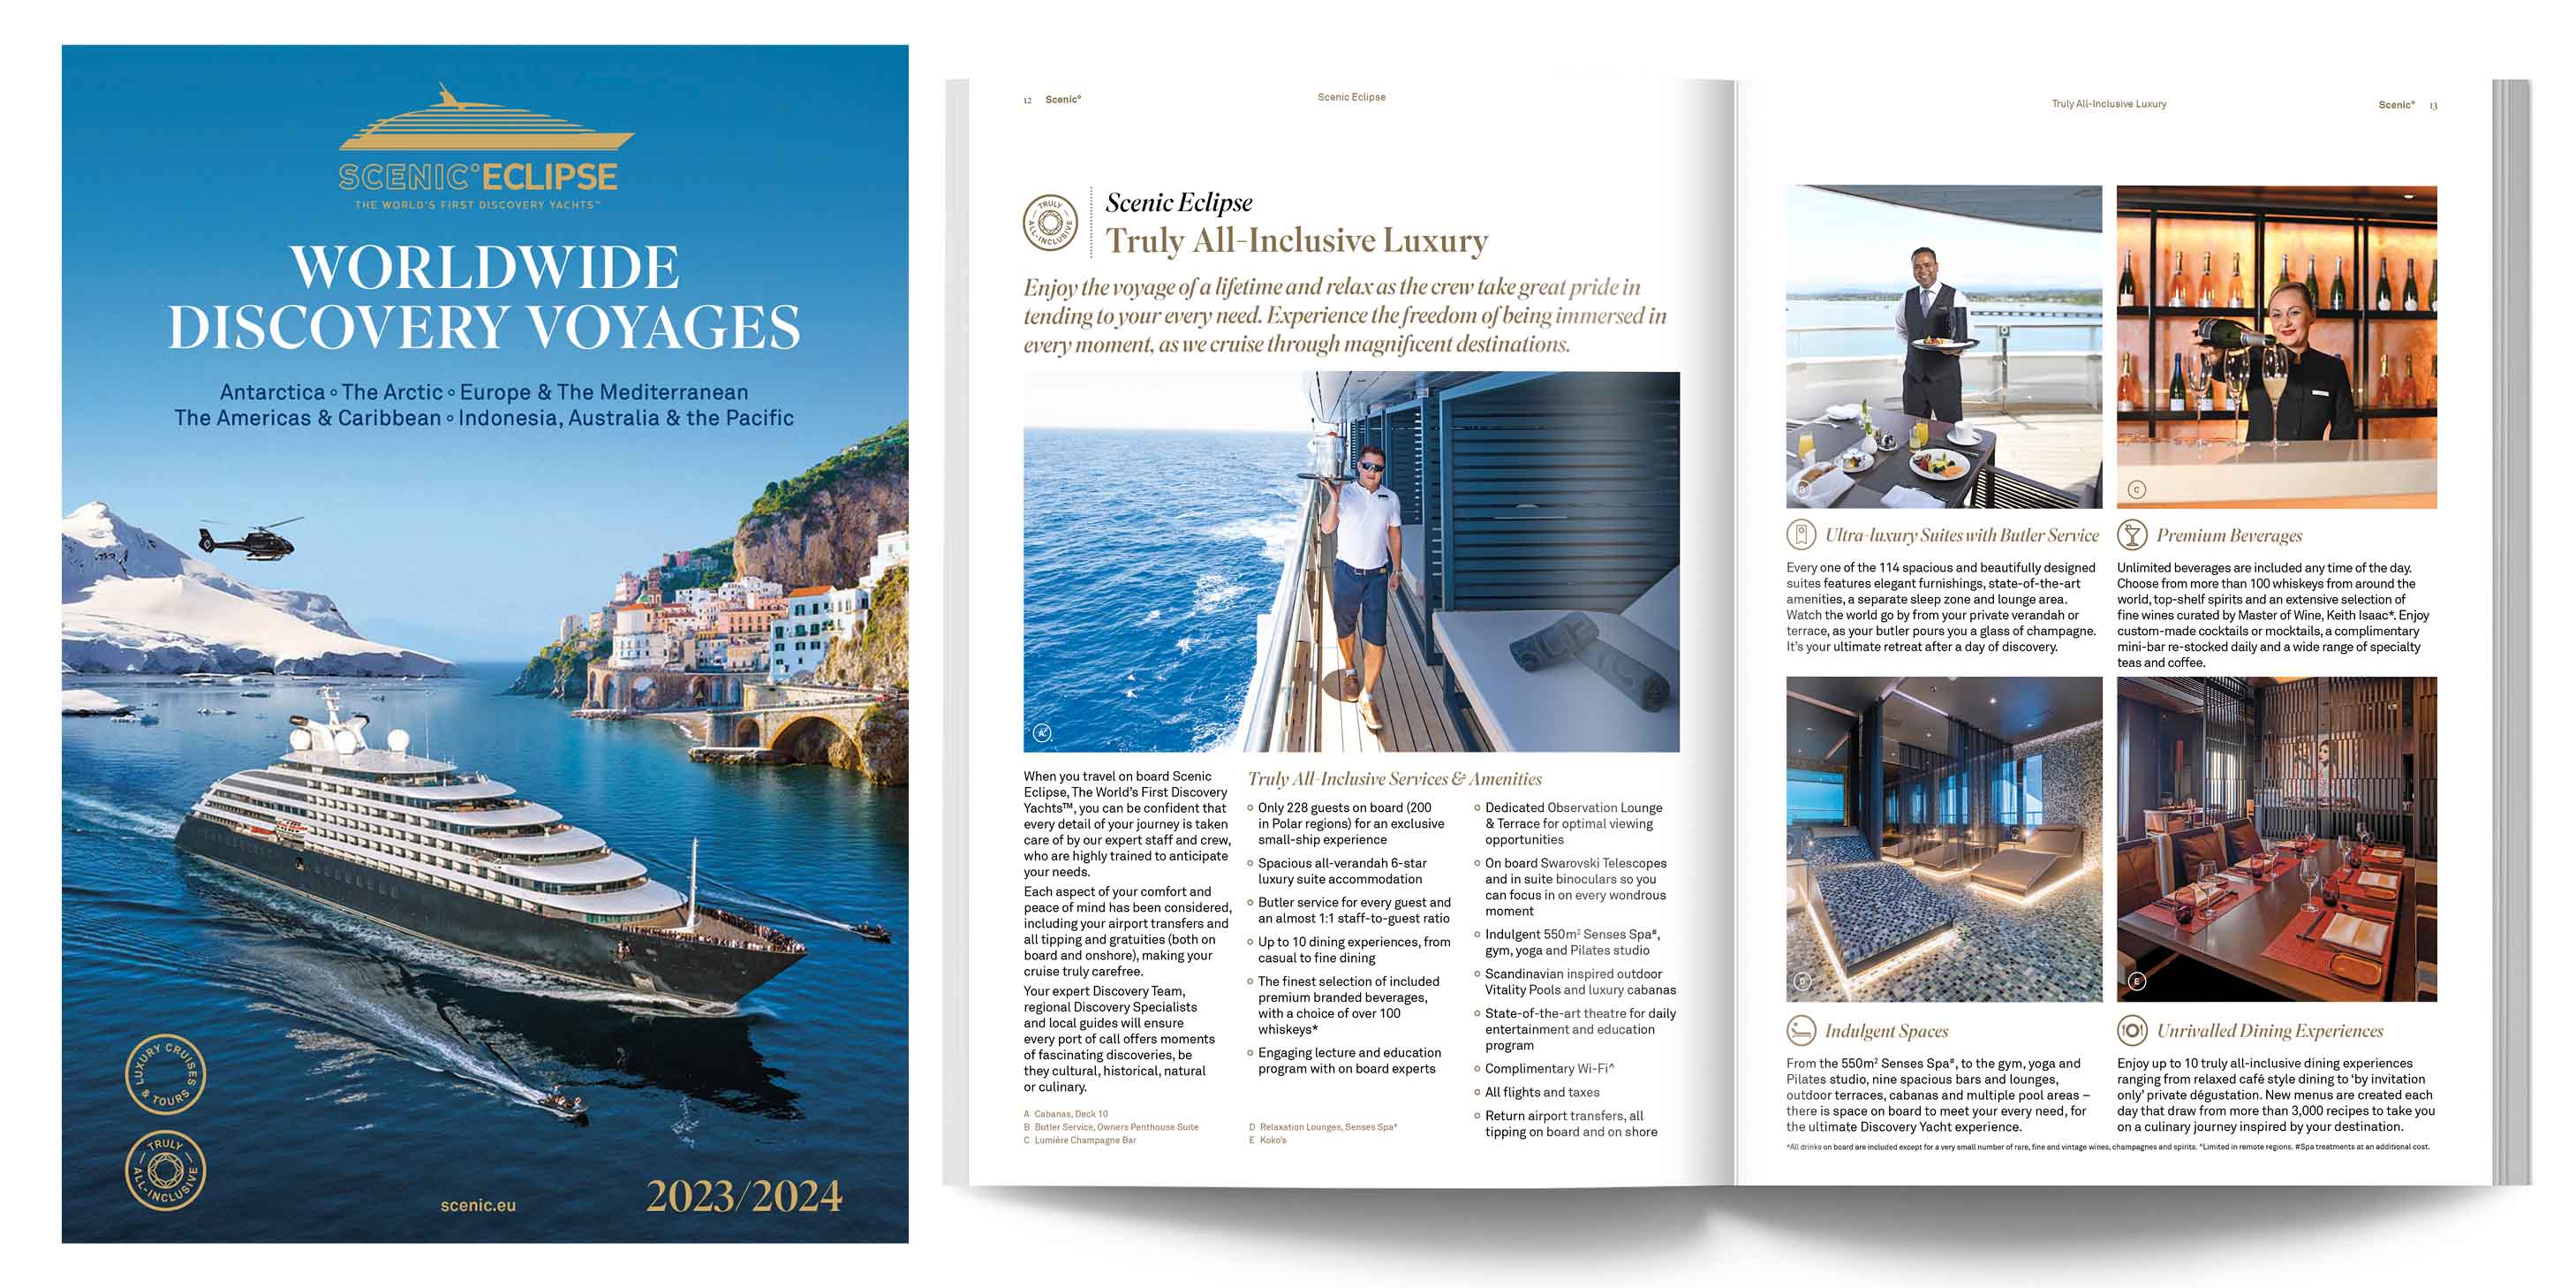 Worldwide Discovery Voyages 2023/2024 Brochure